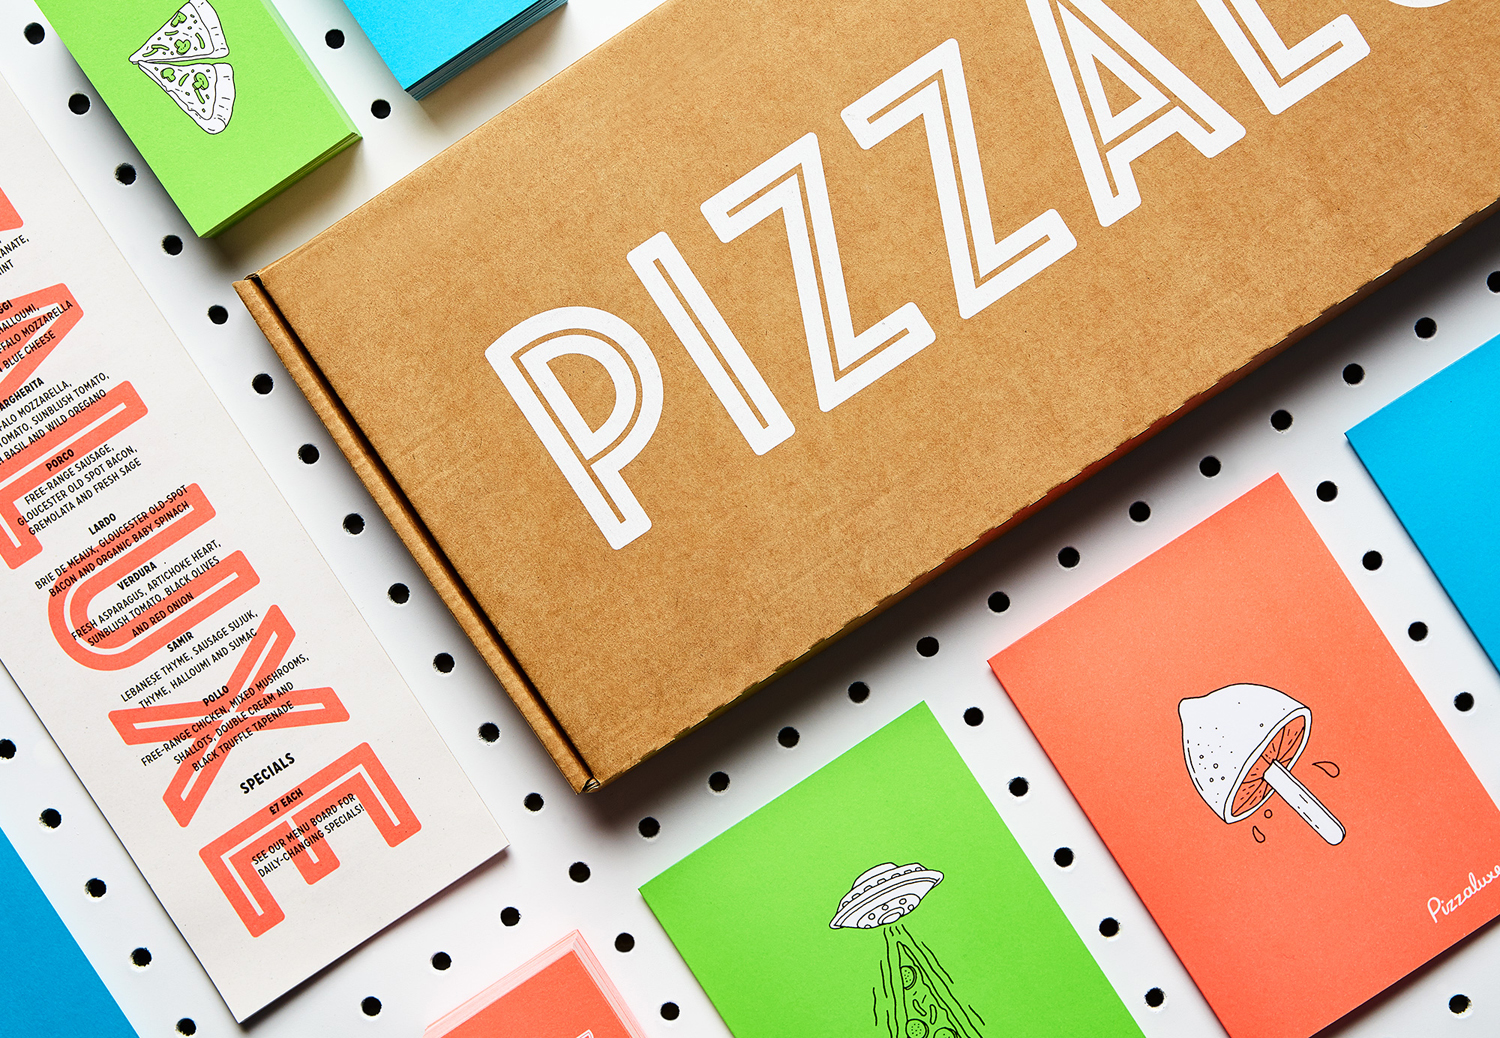 Print for PizzaLuxe designed by Touch and illustrated by Damien Weighill